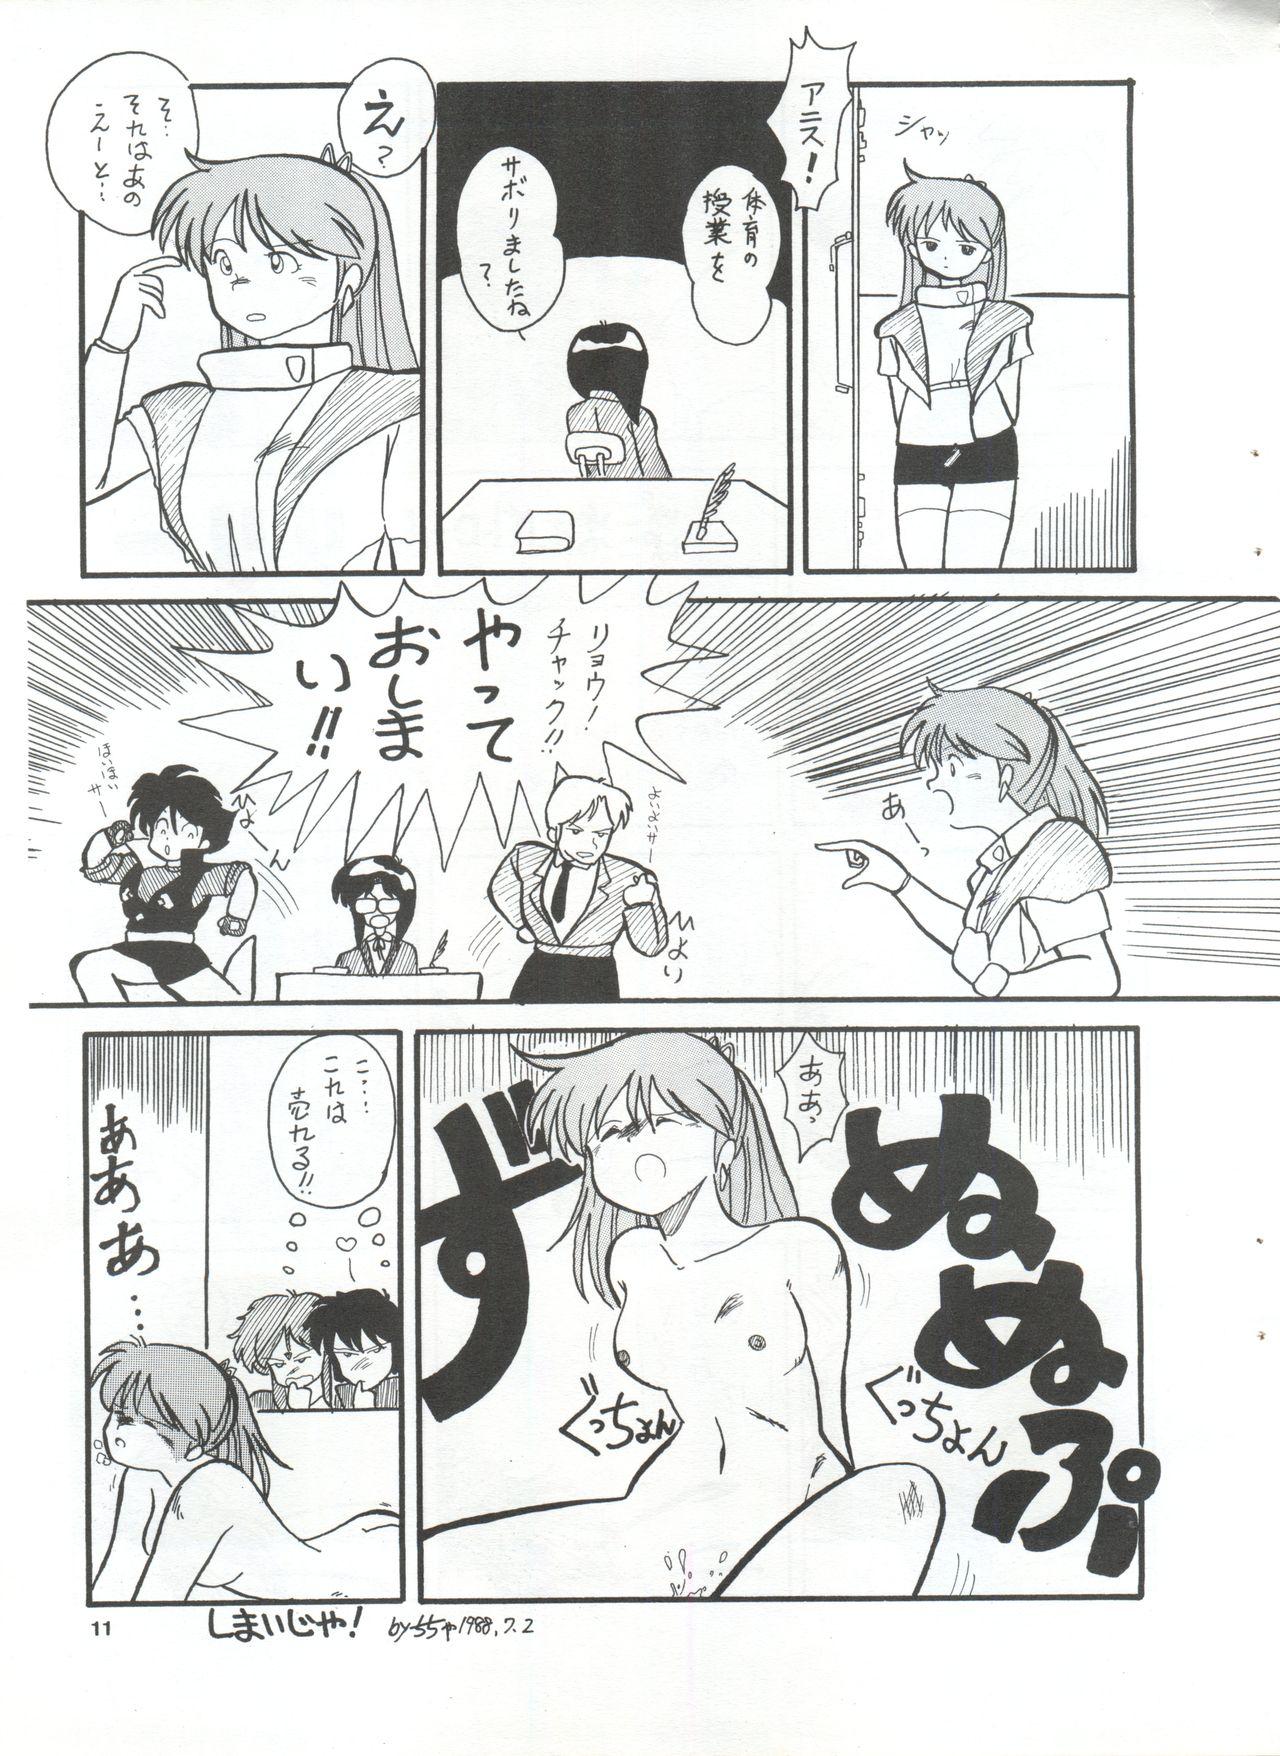 Butt Plug YATTE! YATTE! Mission 1 - Dirty pair Sonic soldier borgman Cowgirl - Page 10